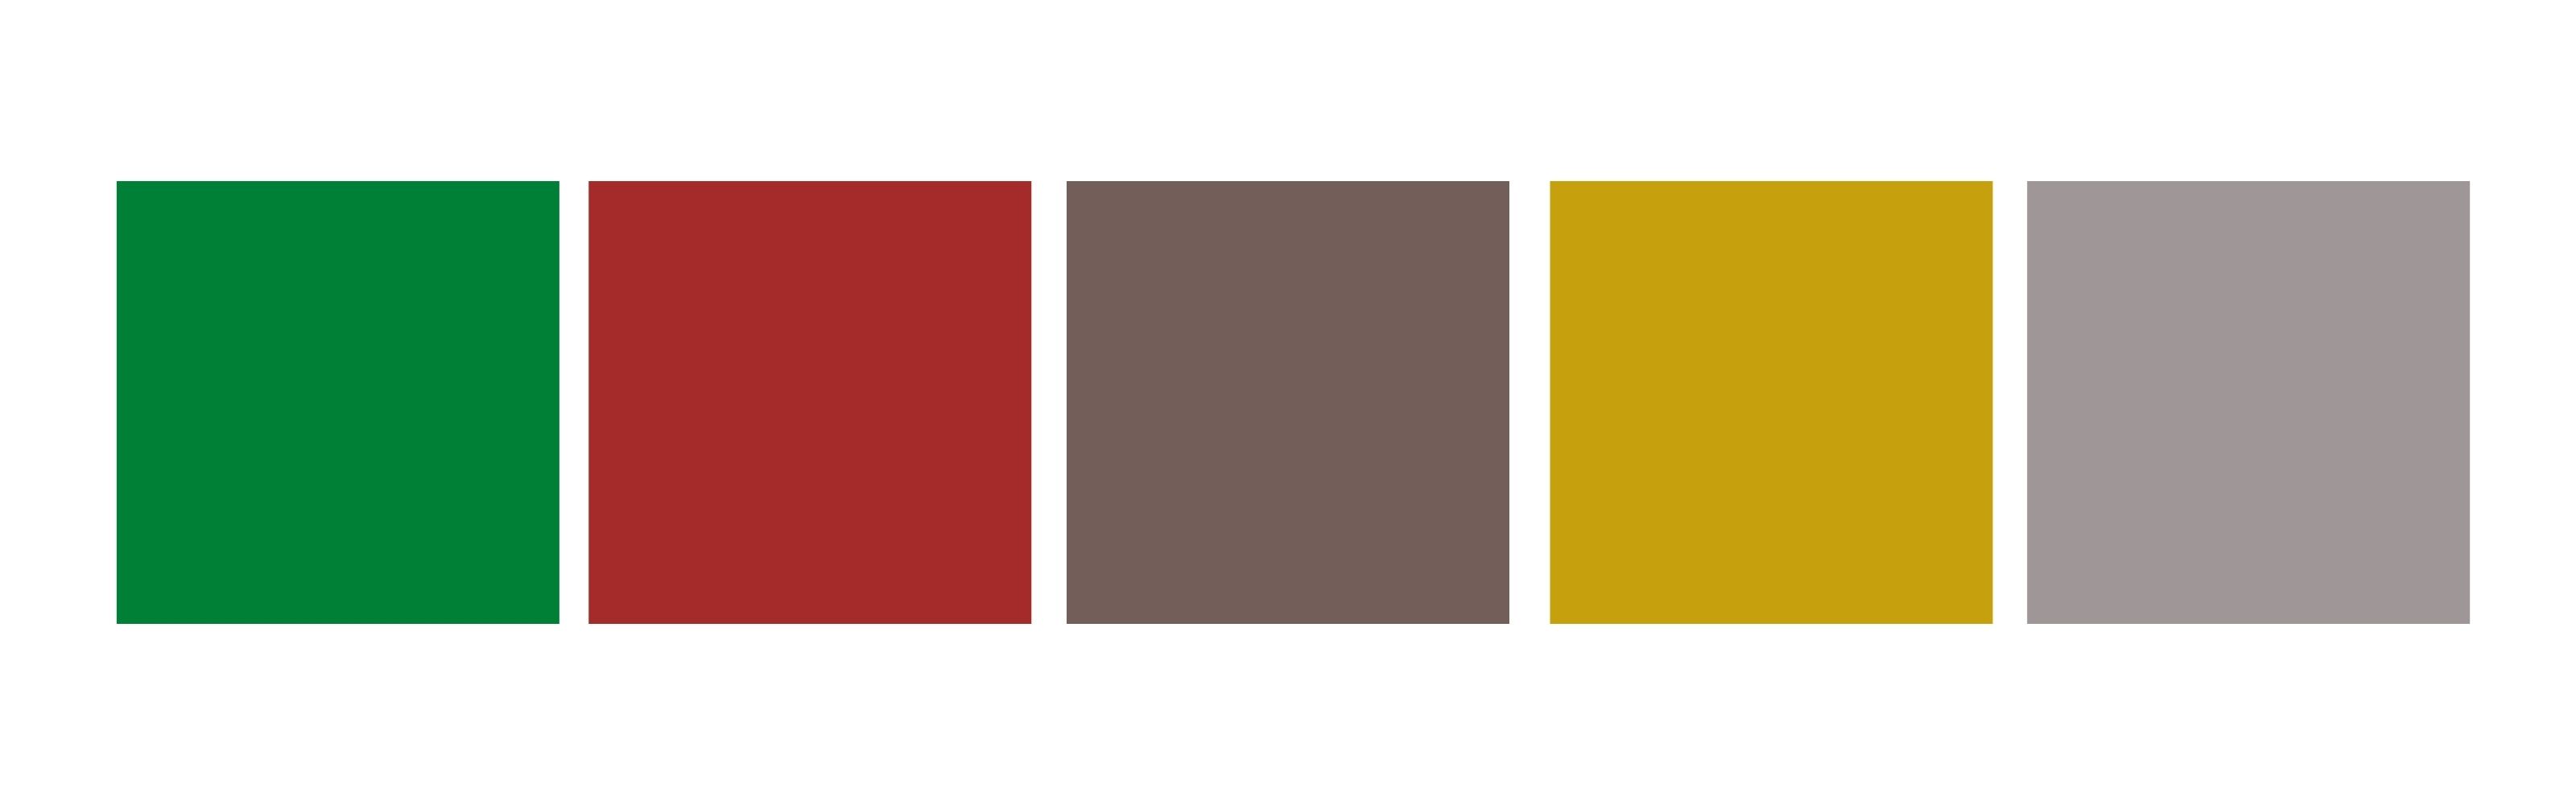 color theory earth tones palette